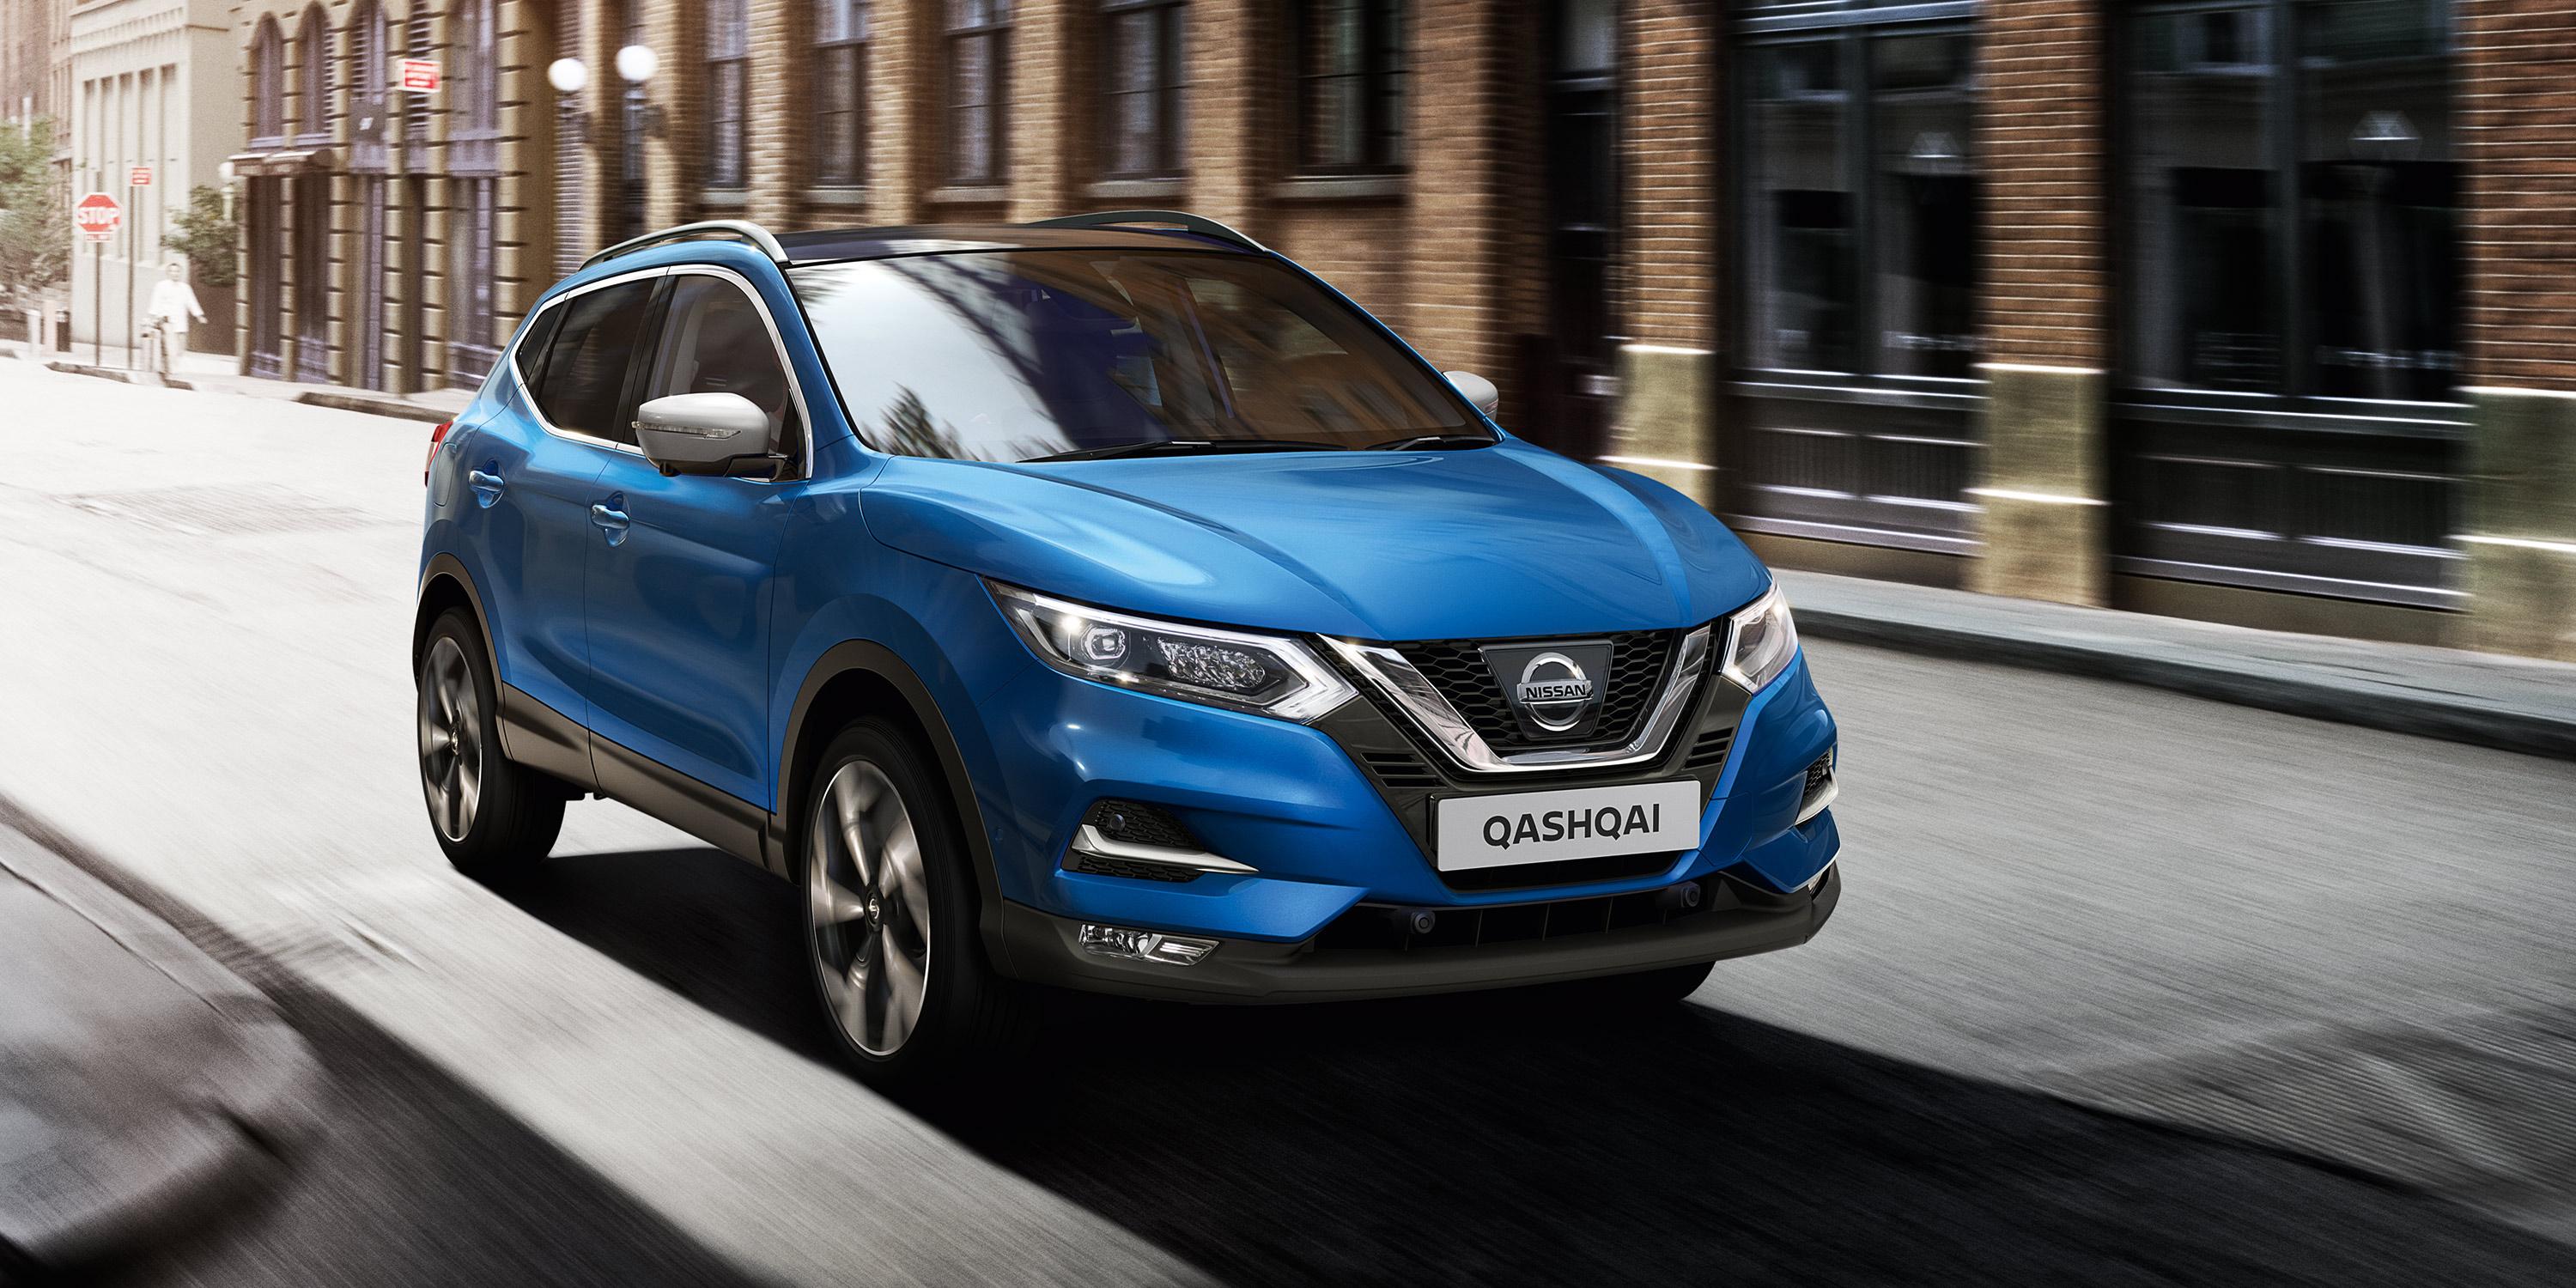 Nissan Qashqai front side view on road in city 1080p HD desktop